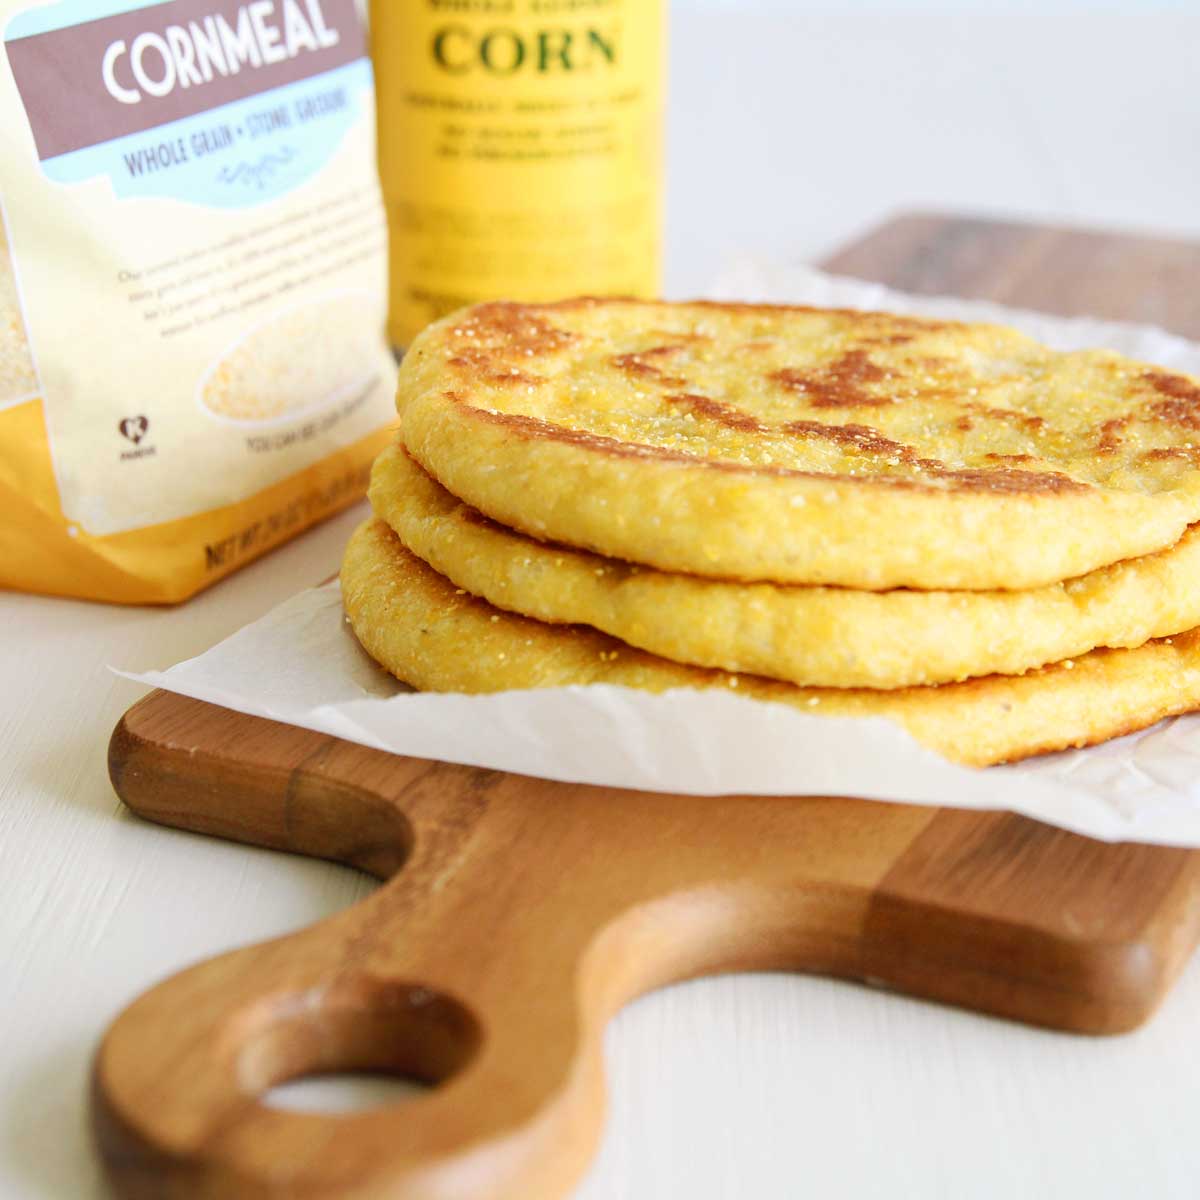 Healthy Sweet Corn Flatbread Recipe -- Easy, No Knead Dough made with corn meal and canned corn puree